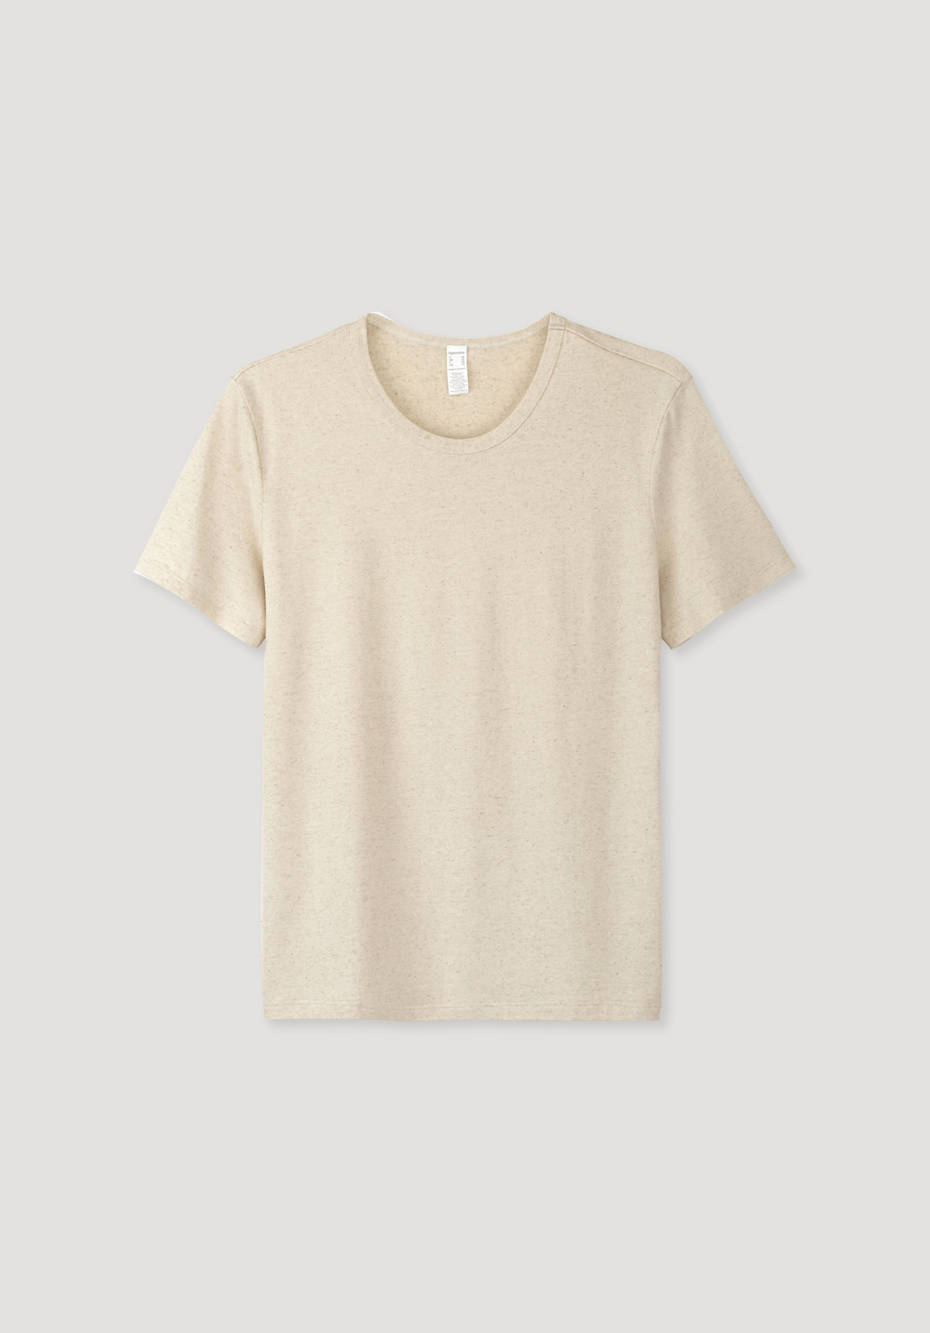 Shirt made from organic cotton with linen